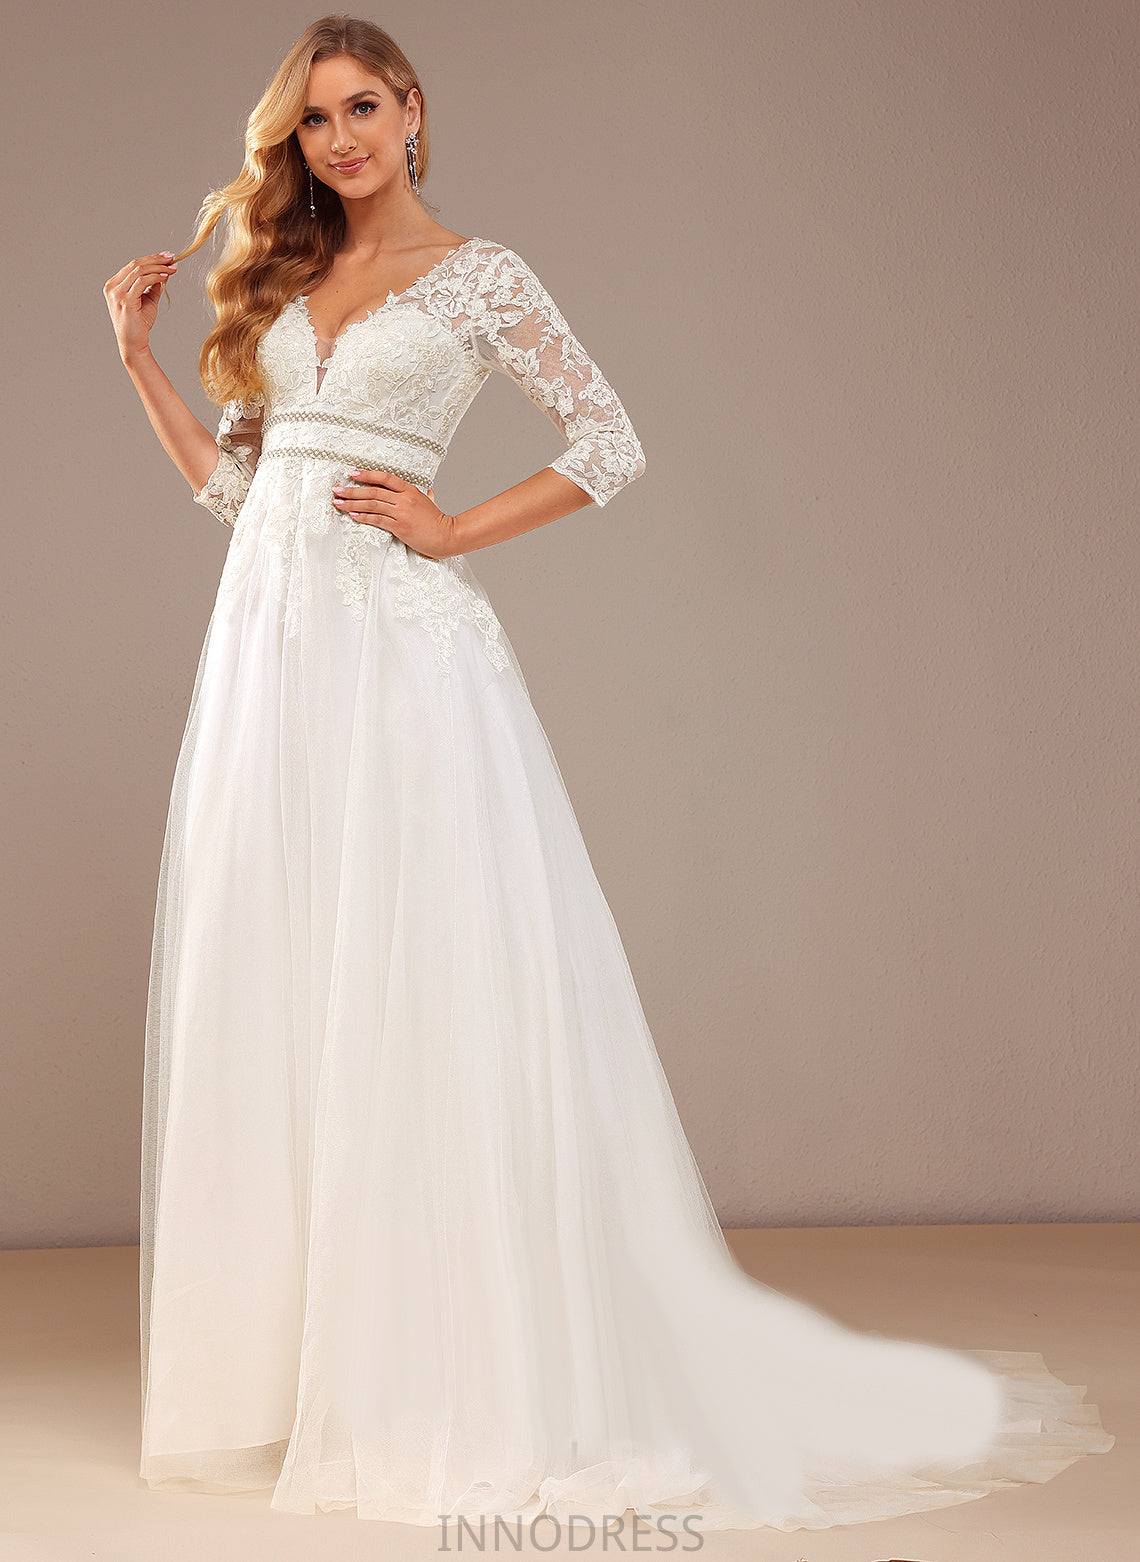 Dress Ball-Gown/Princess With Sequins Valerie Lace Tulle V-neck Beading Train Wedding Wedding Dresses Lace Court